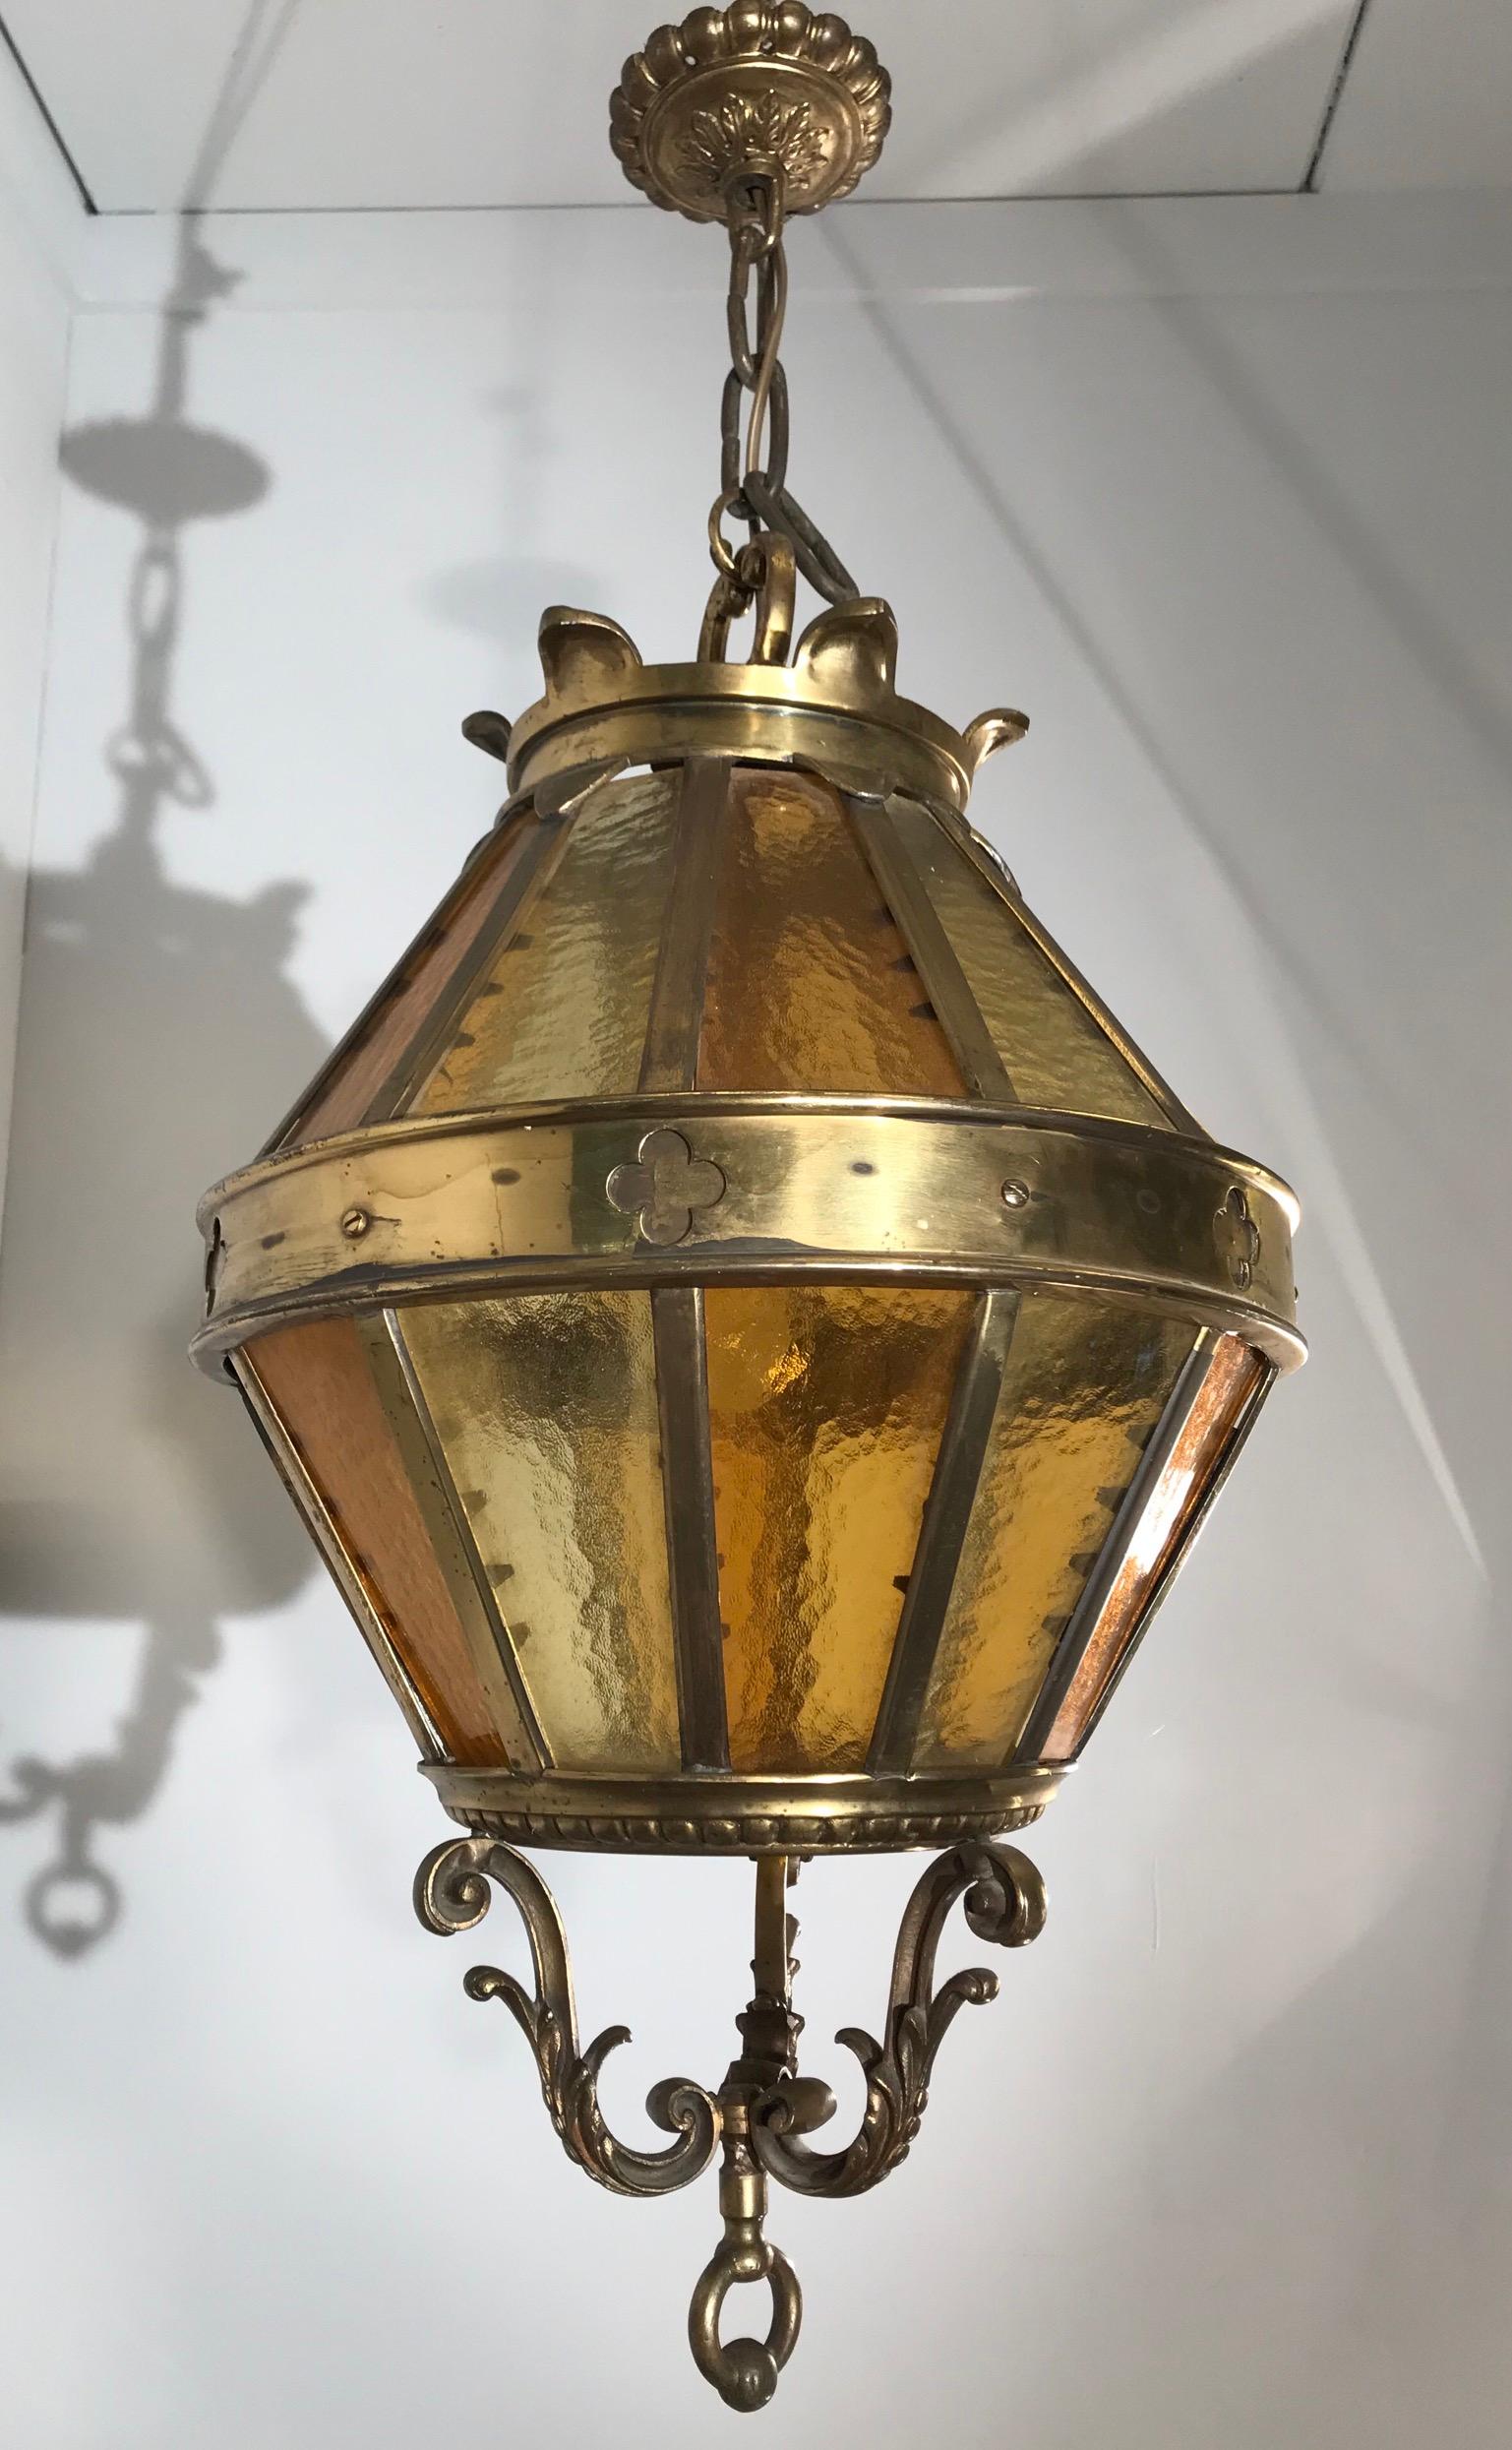 Top quality and large size, handcrafted light fixture.

With early 20th century lighting being one of our specialities, this gorgeous and large Gothic pendant from the Arts & Crafts era was another one of our recent, great finds. The 24 antique and